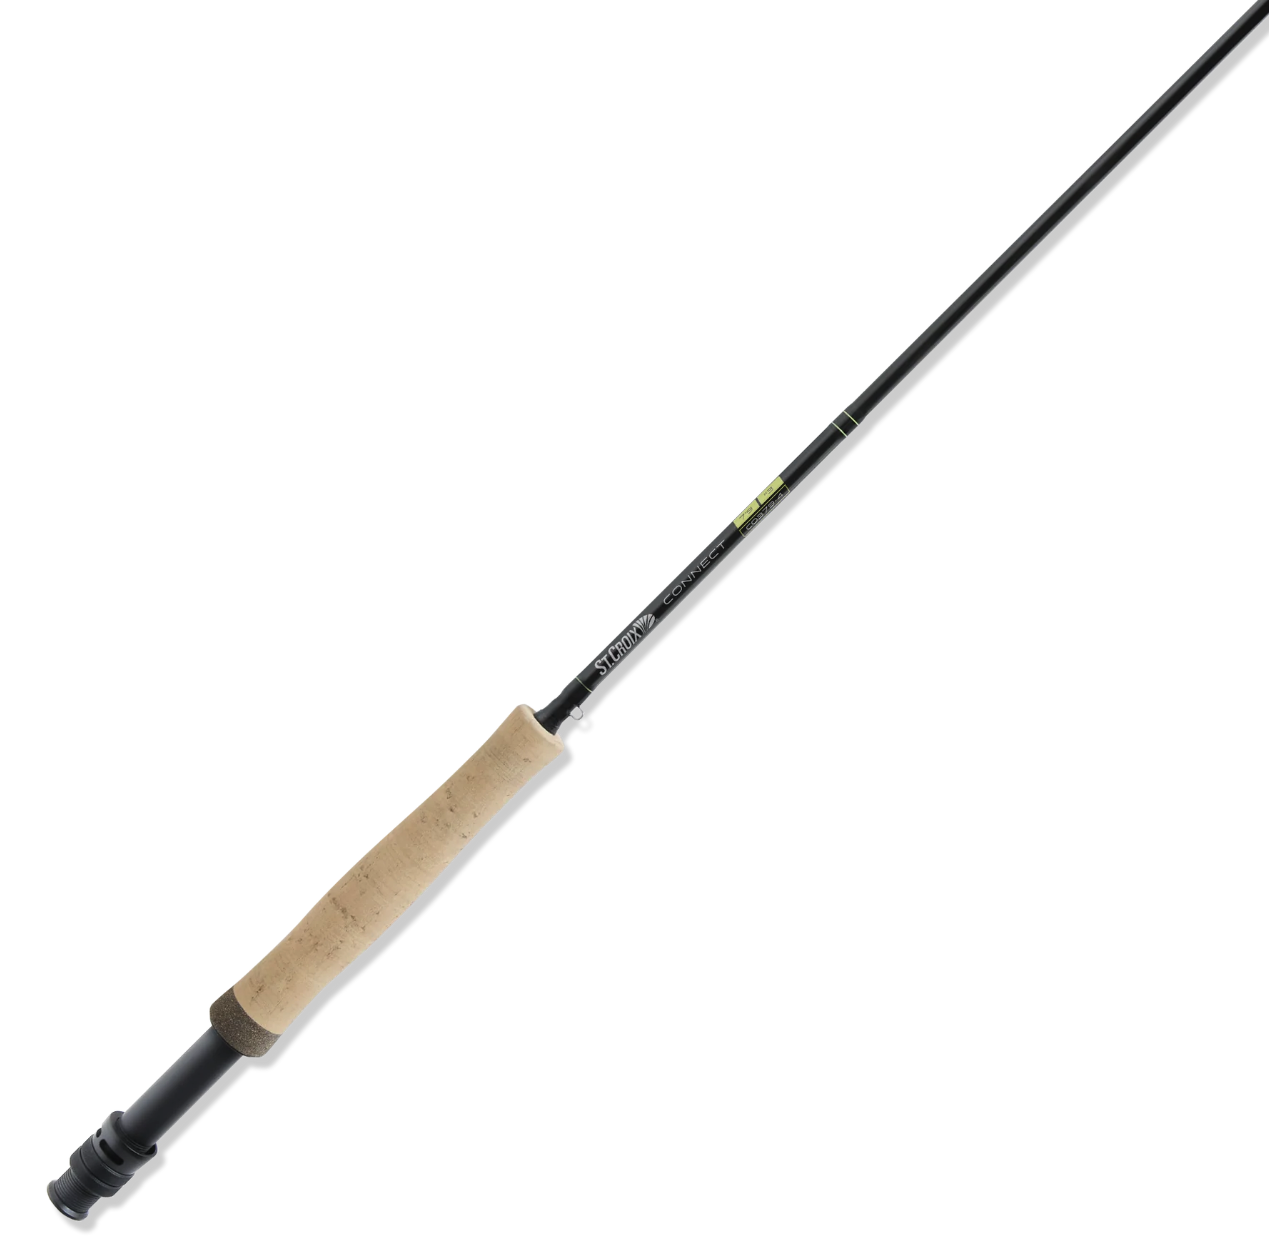 Buy St. Croix Connect Fly Rod online at The Fly Fishers.